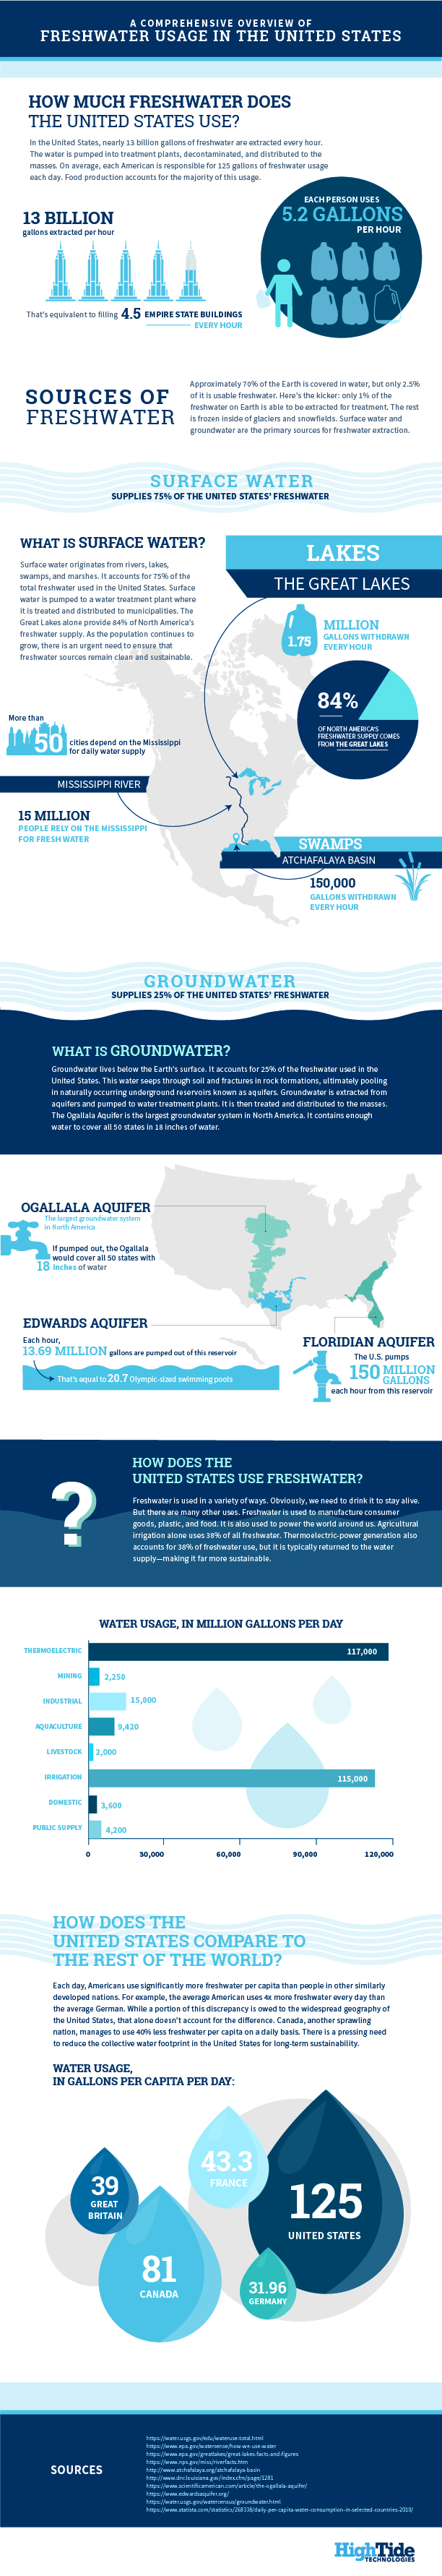 Importance of Monitoring Our Water Footprint: Freshwater Usage in the United States - Infographic